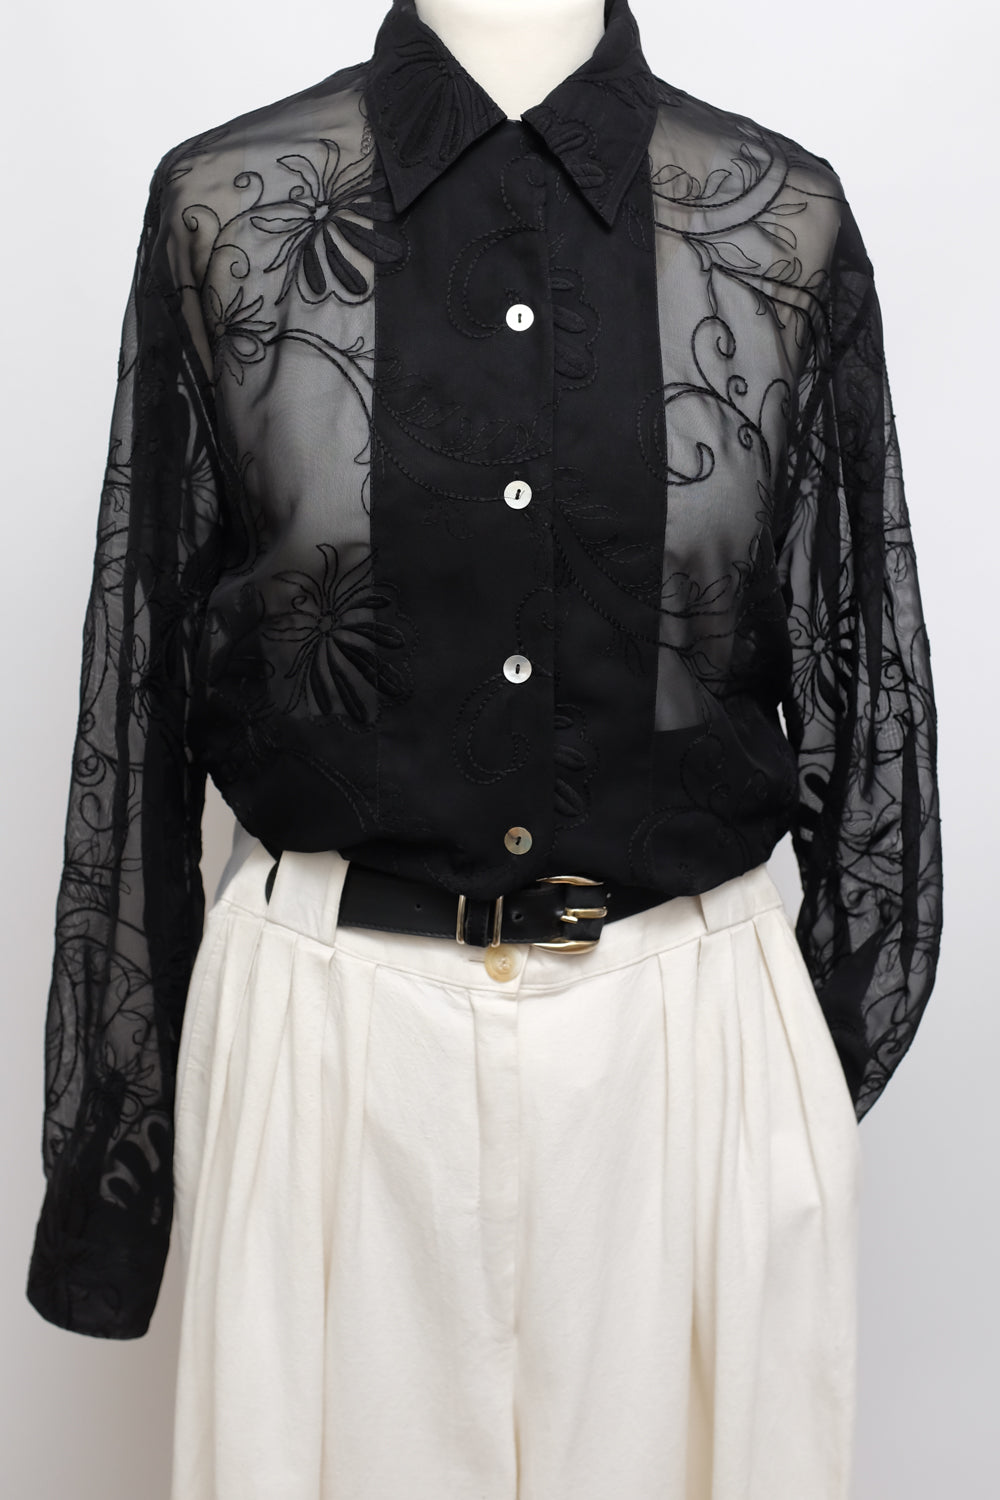 SEE THROUGH BLACK FLORAL EMBROIDERY SHIRT